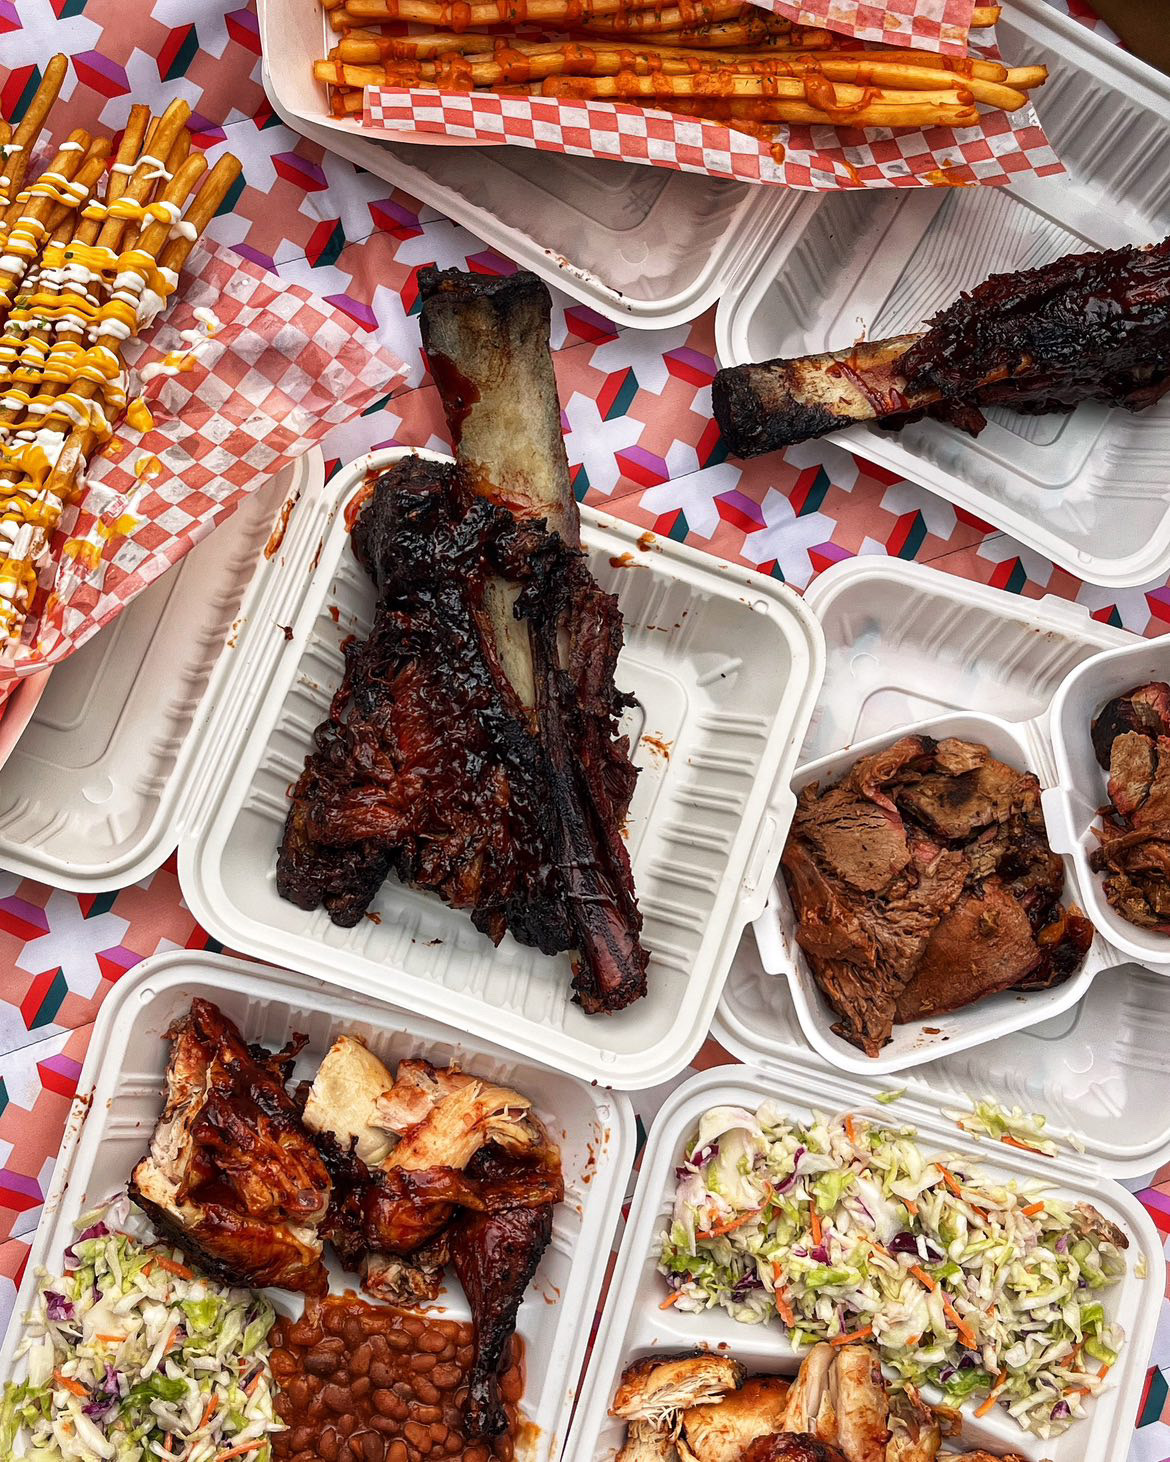 Several takeout containers of barbecue ribs and other barbecue-style dishes set on top of a red and white-checkered tablecloth.